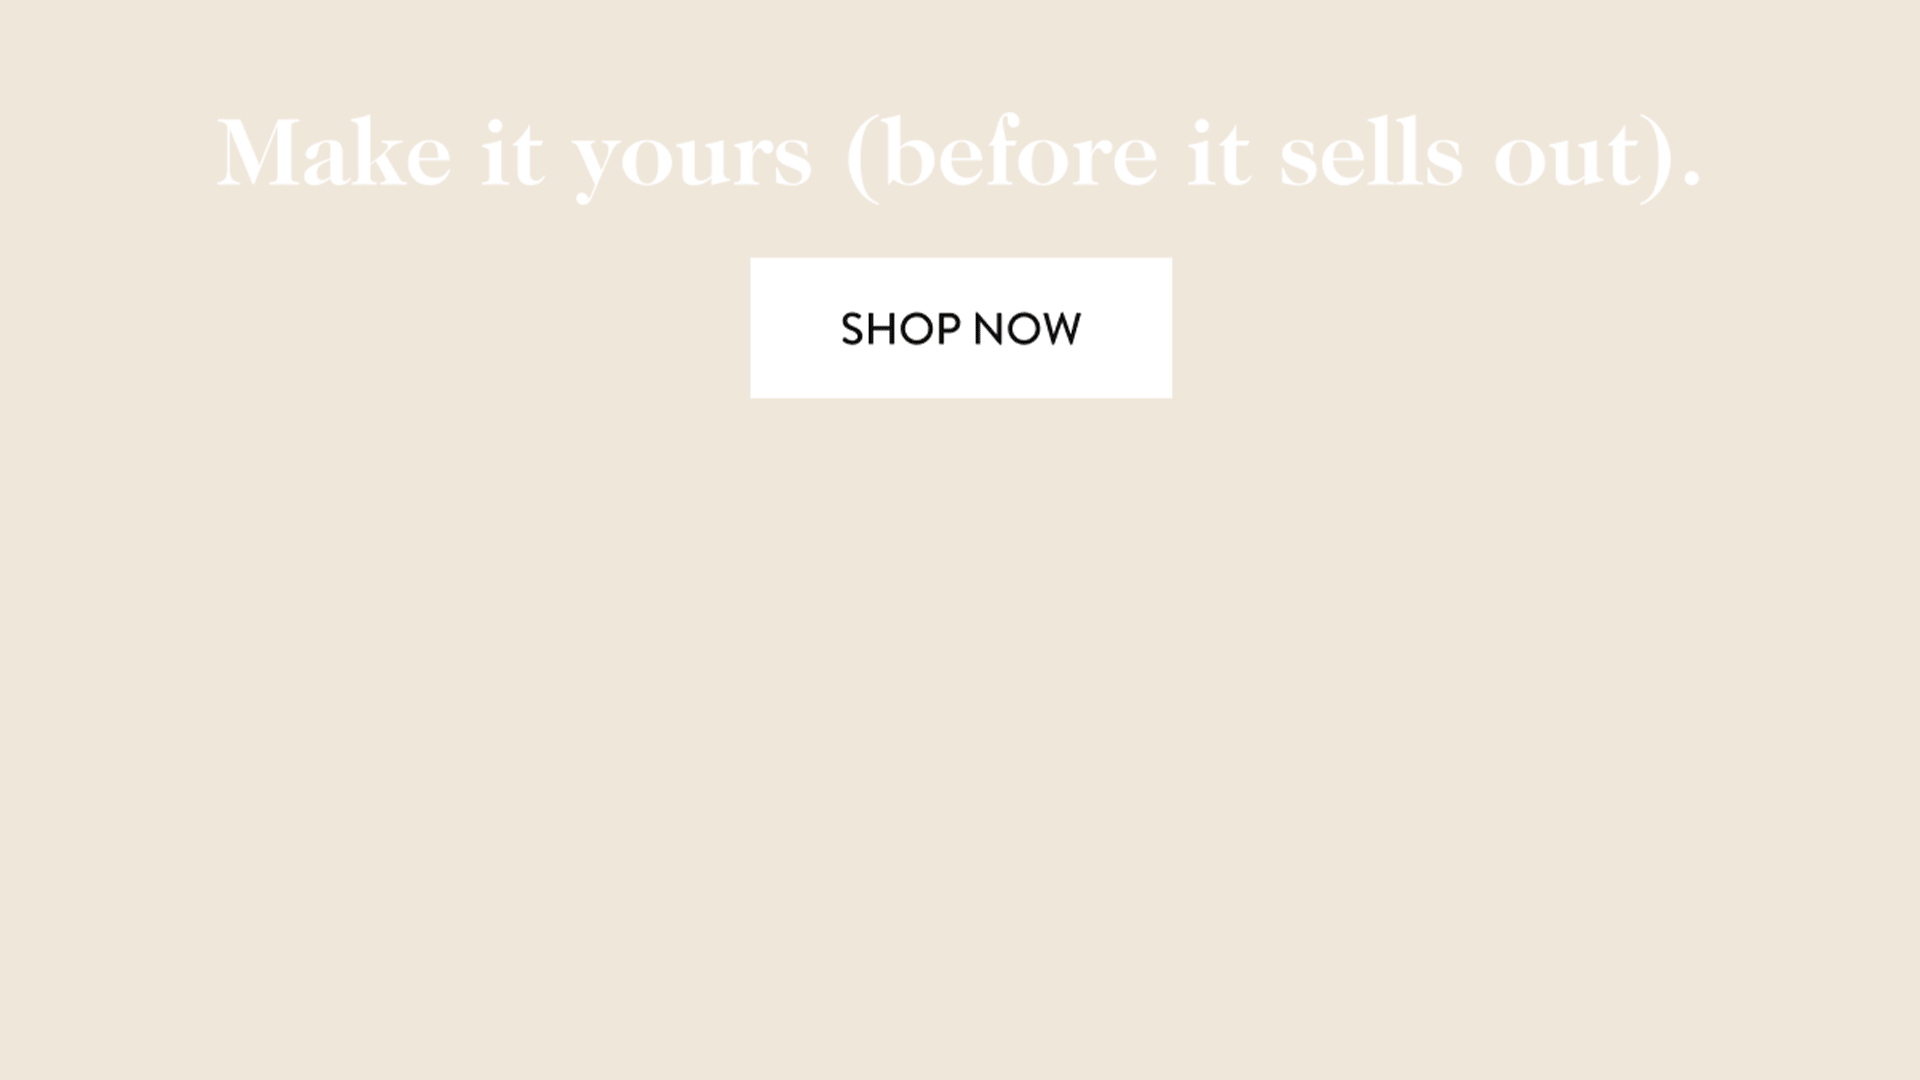 Make it yours (before it sells out) - shop now